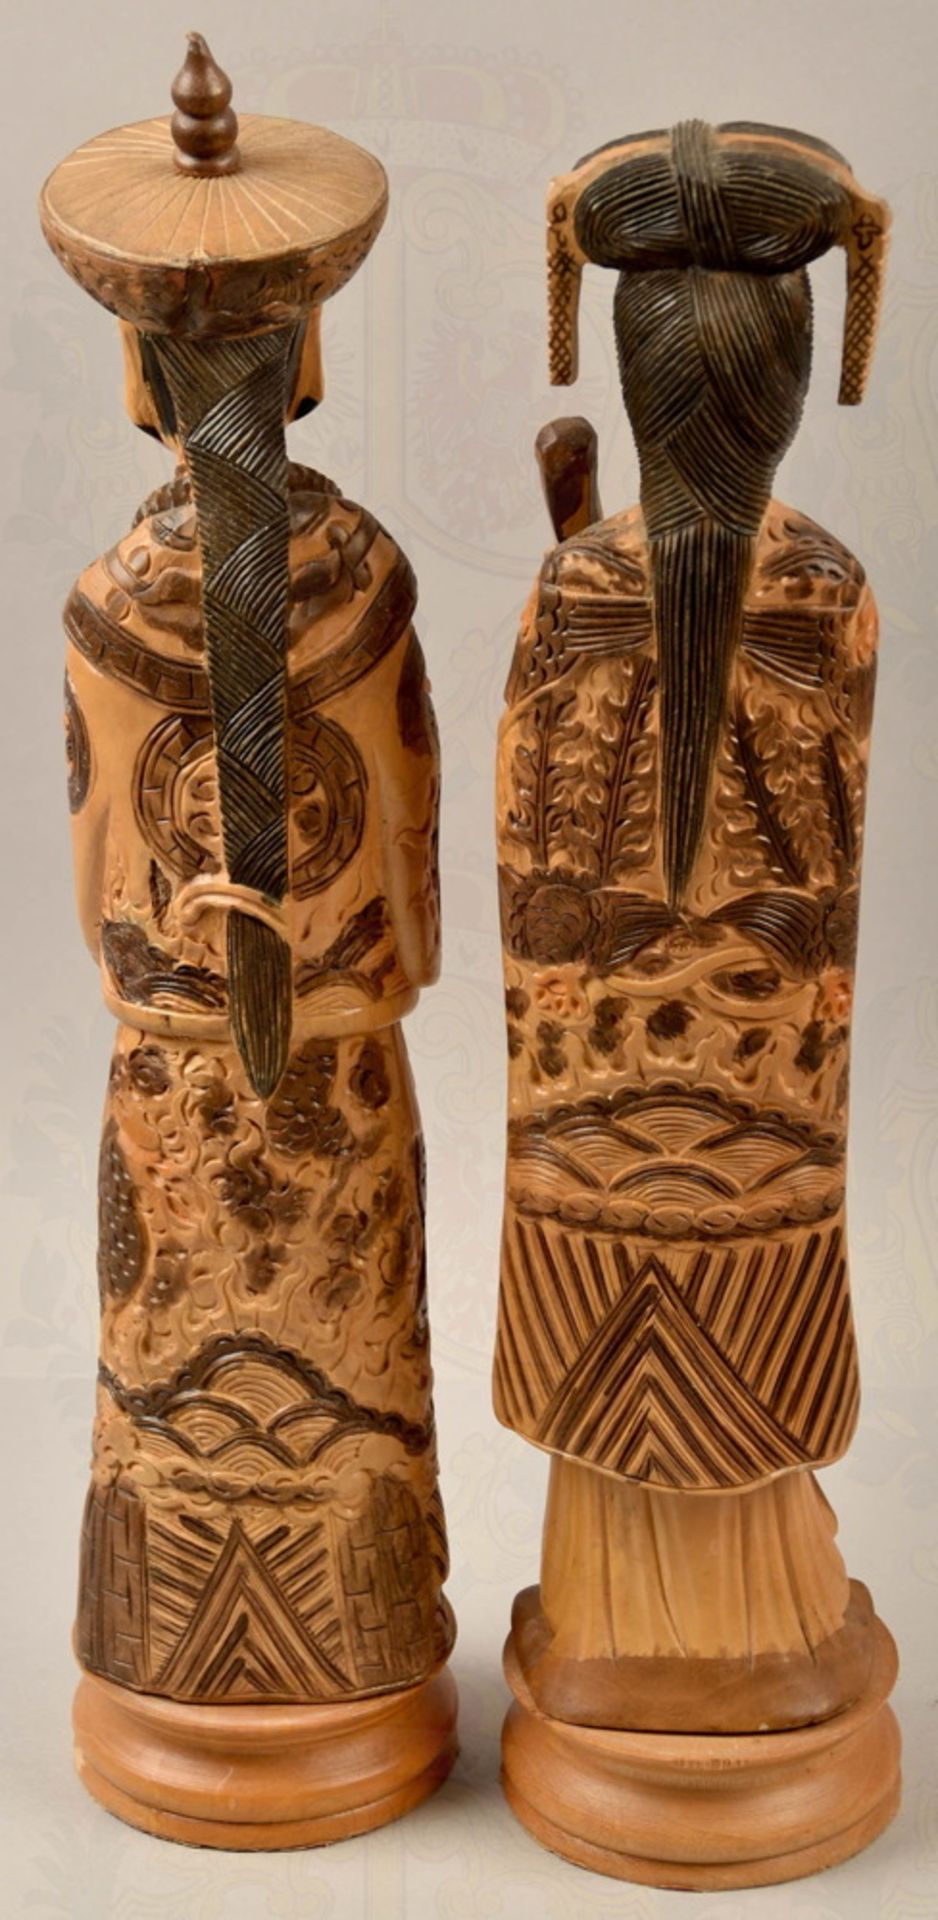 Pair of wooden figures with traditional Asian clothing - Image 2 of 2